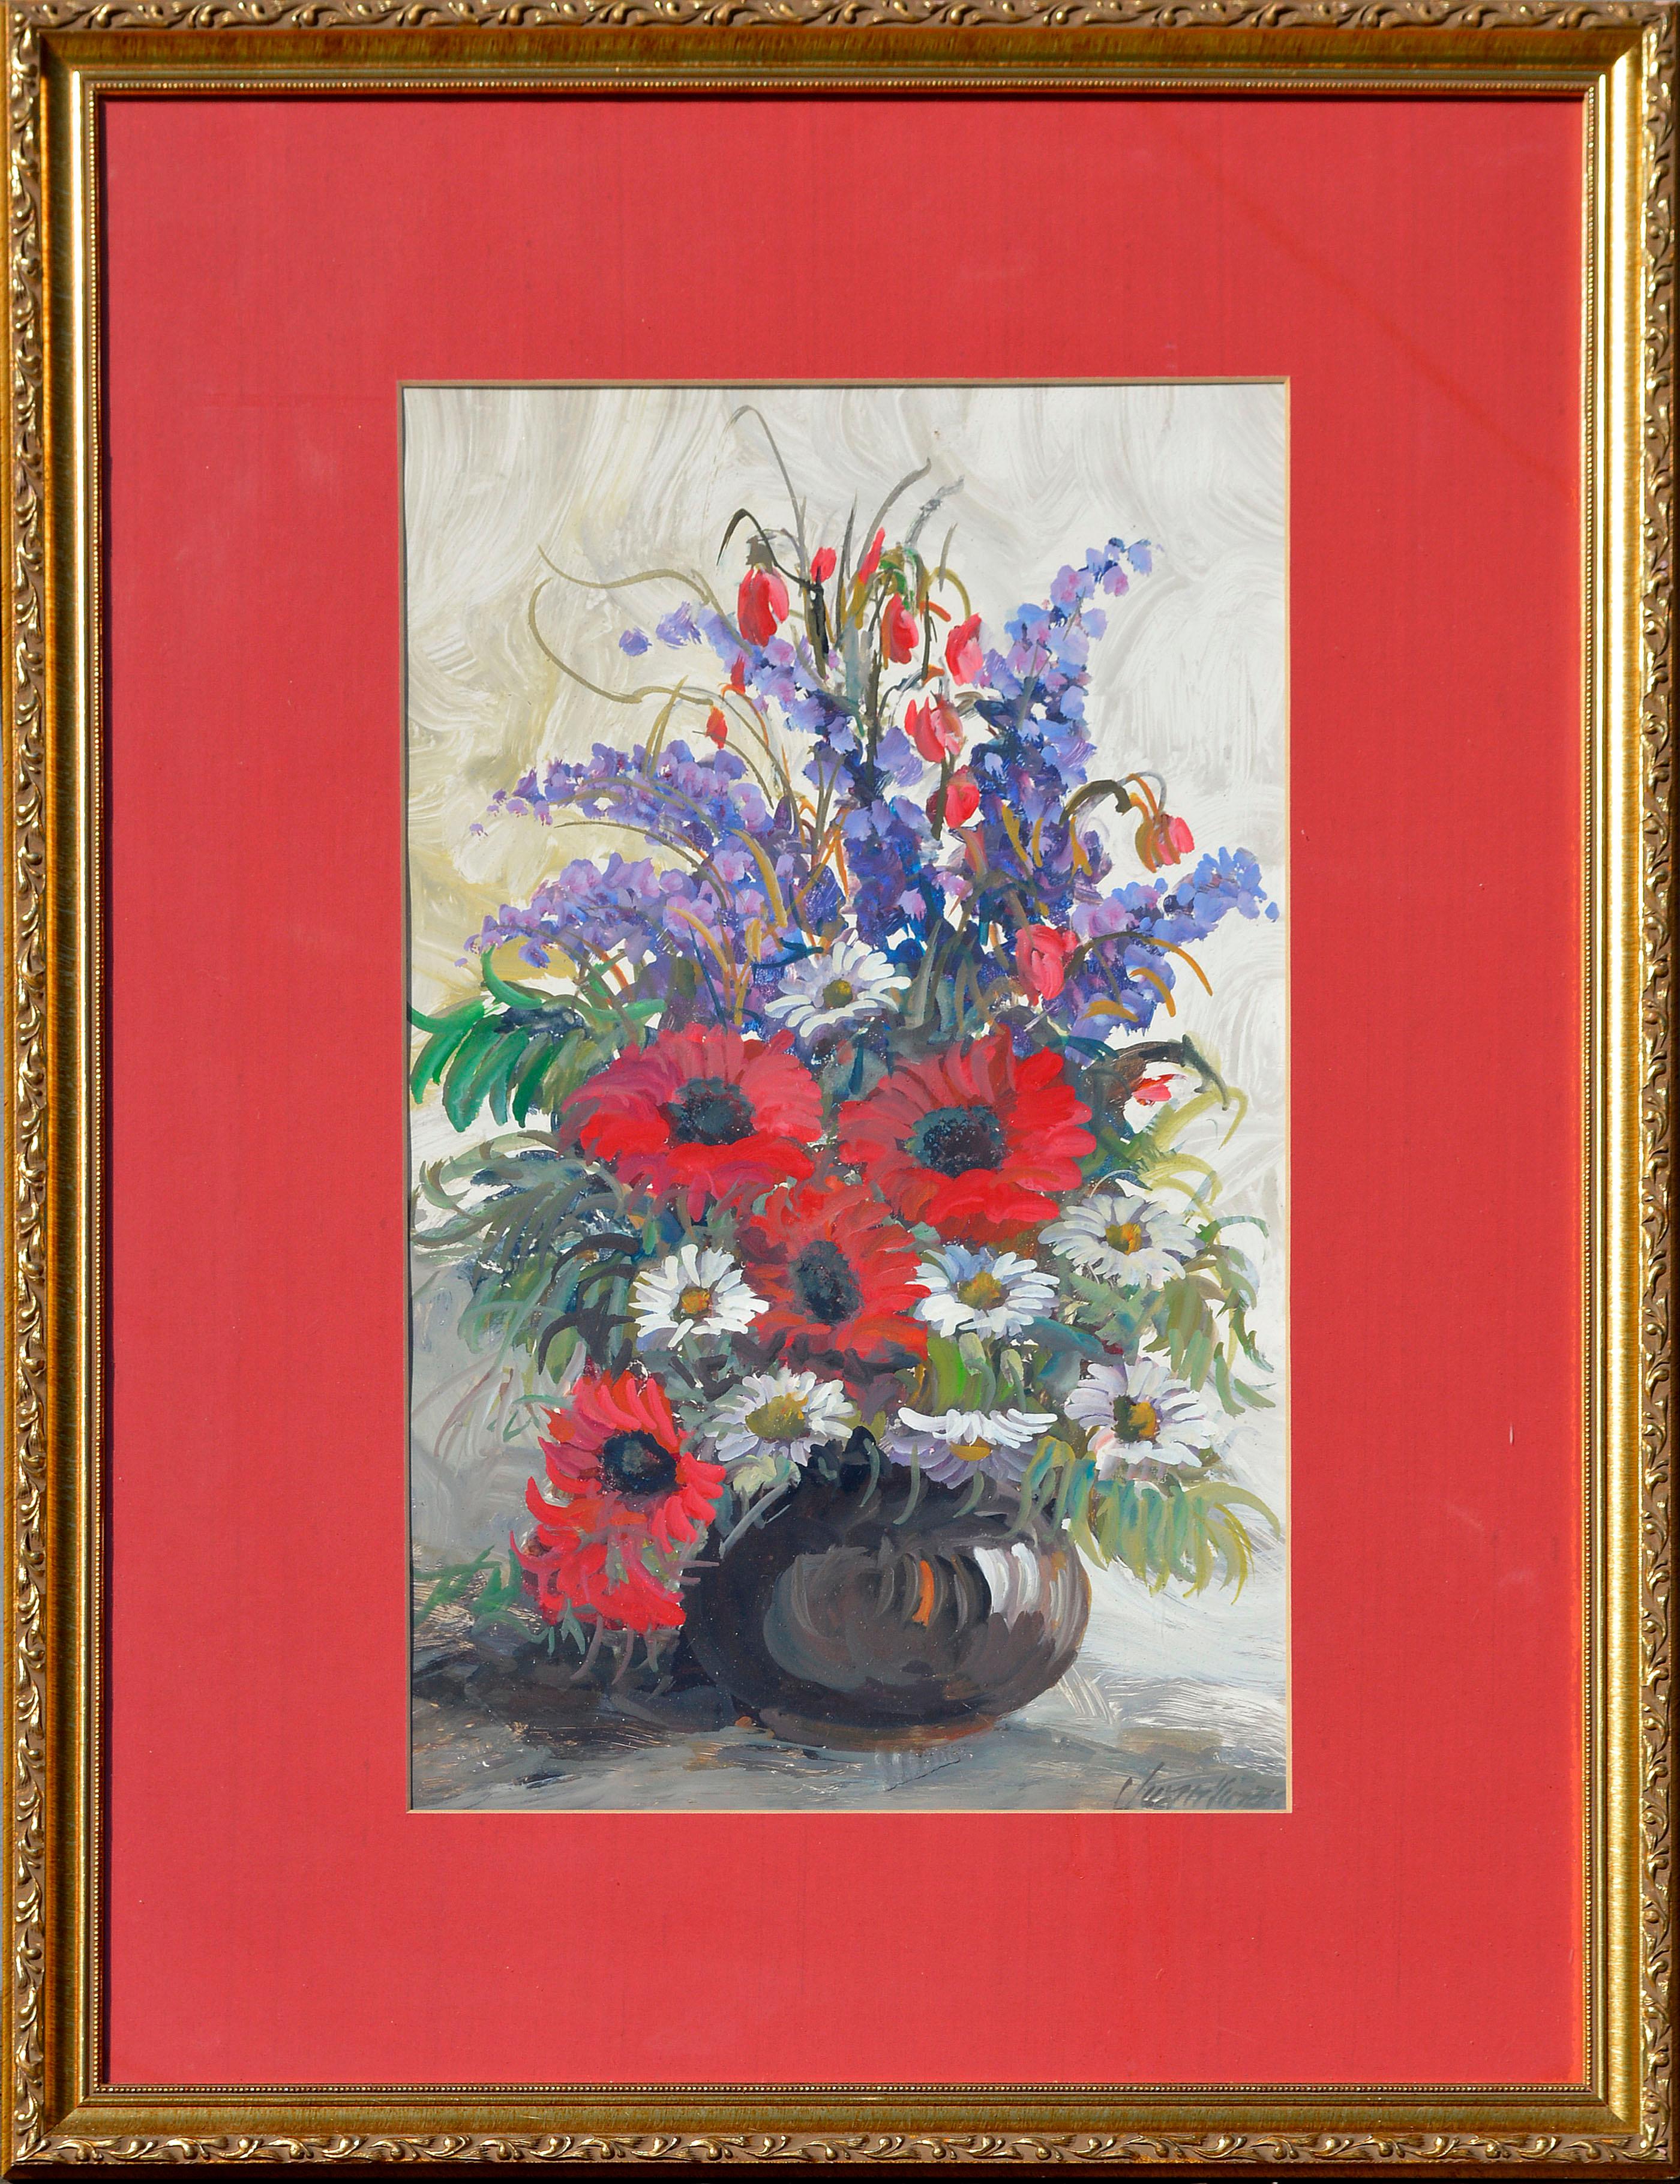 Unknown Still-Life Painting - Delphinium, Daisies and Gerber Daisies - Red Floral Bouquet Still-Life 